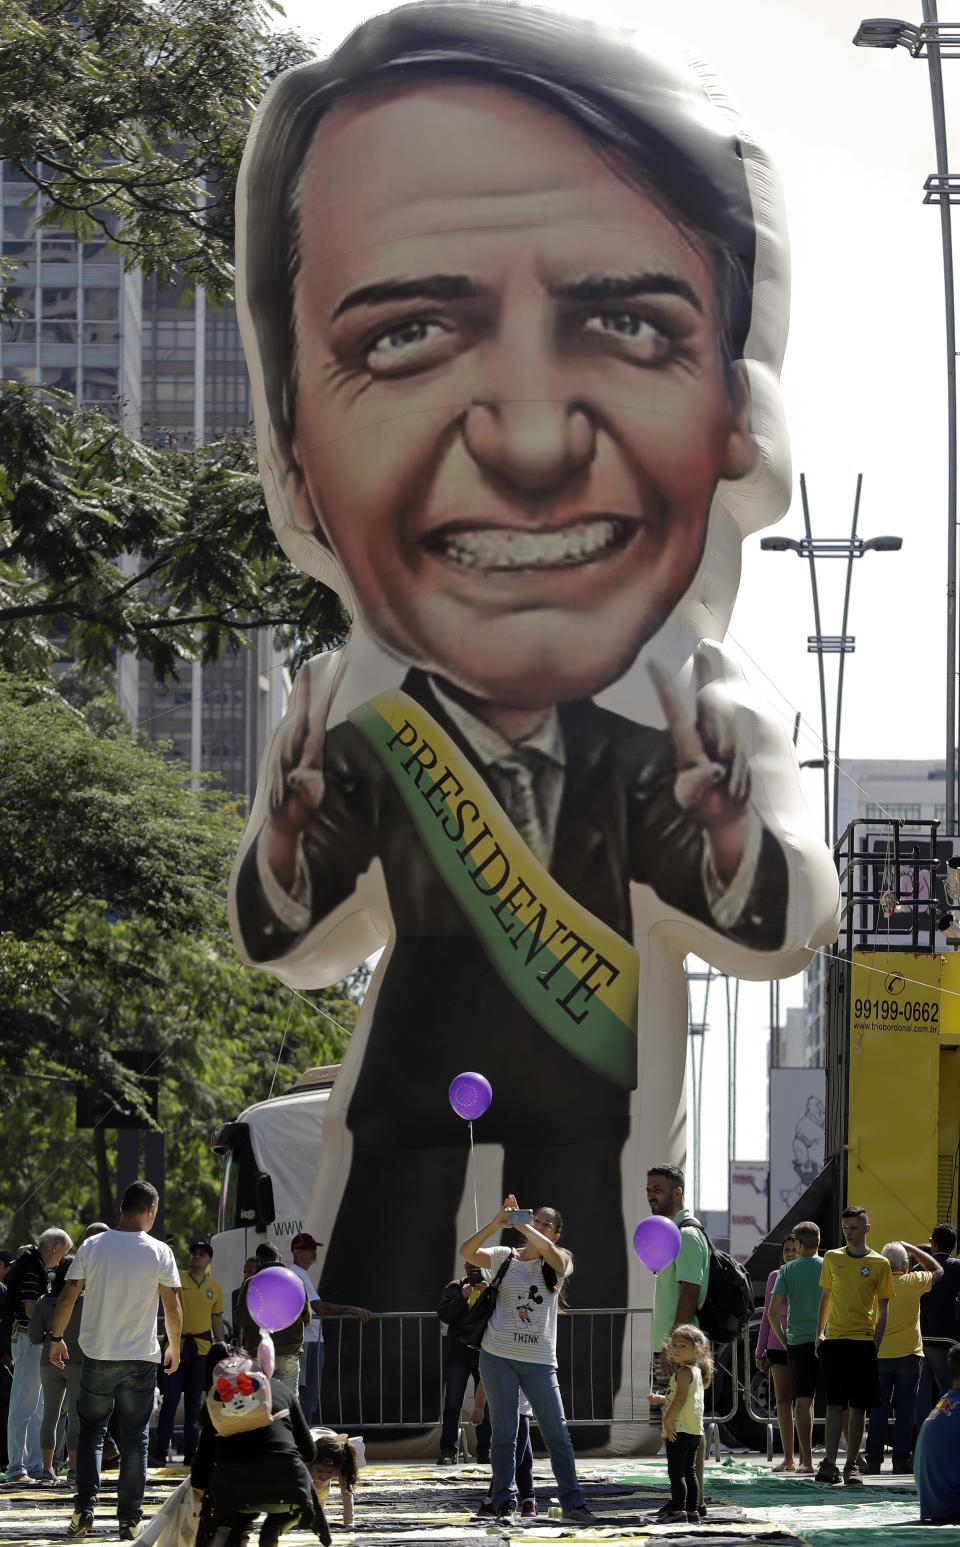 Supporters of Brazil's President Jair Bolsonaro gather around a large, inflatable doll in his image during a rally in his favor along Paulista Avenue in Sao Paulo, Brazil, Sunday, May 26, 2019. The pro-Bolsonaro rally follows anti-government protests against education budget cuts as the leader also battles an uncooperative Congress, a family corruption scandal and falling approval ratings after five months in office. (AP Photo/Andre Penner)